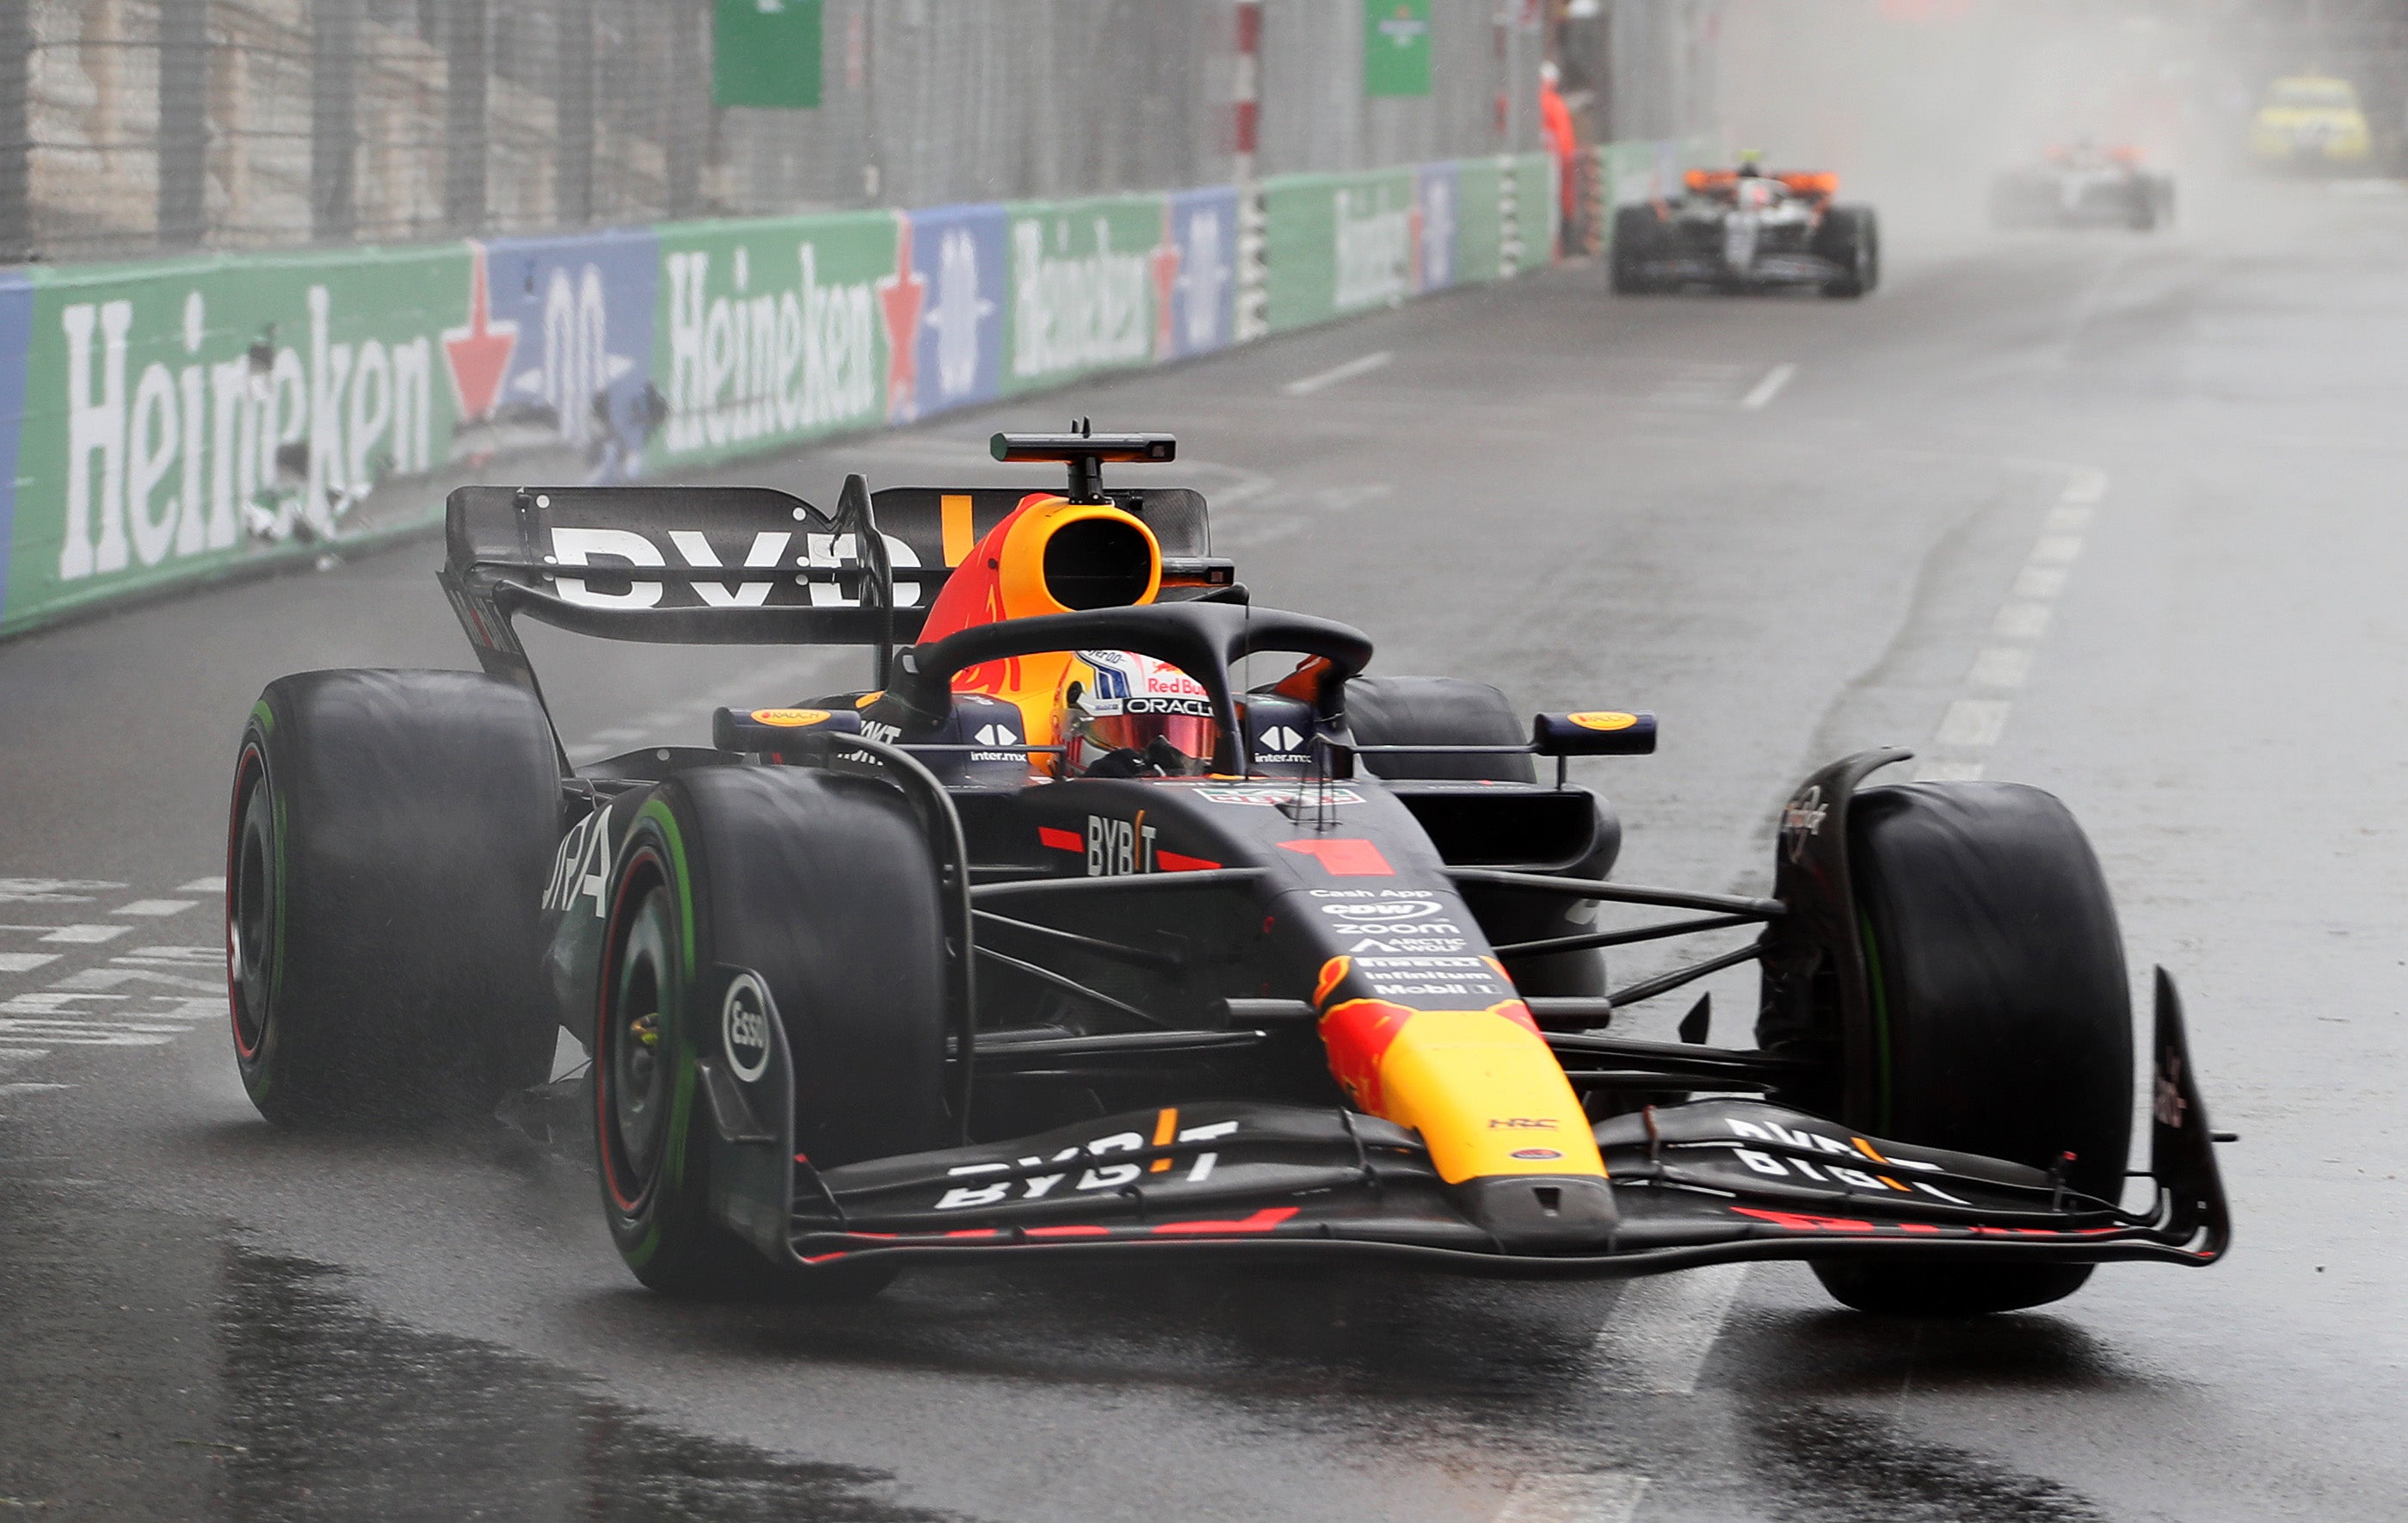 The Dutchman made the right decision to switch onto the right tyres amid rain late in the race